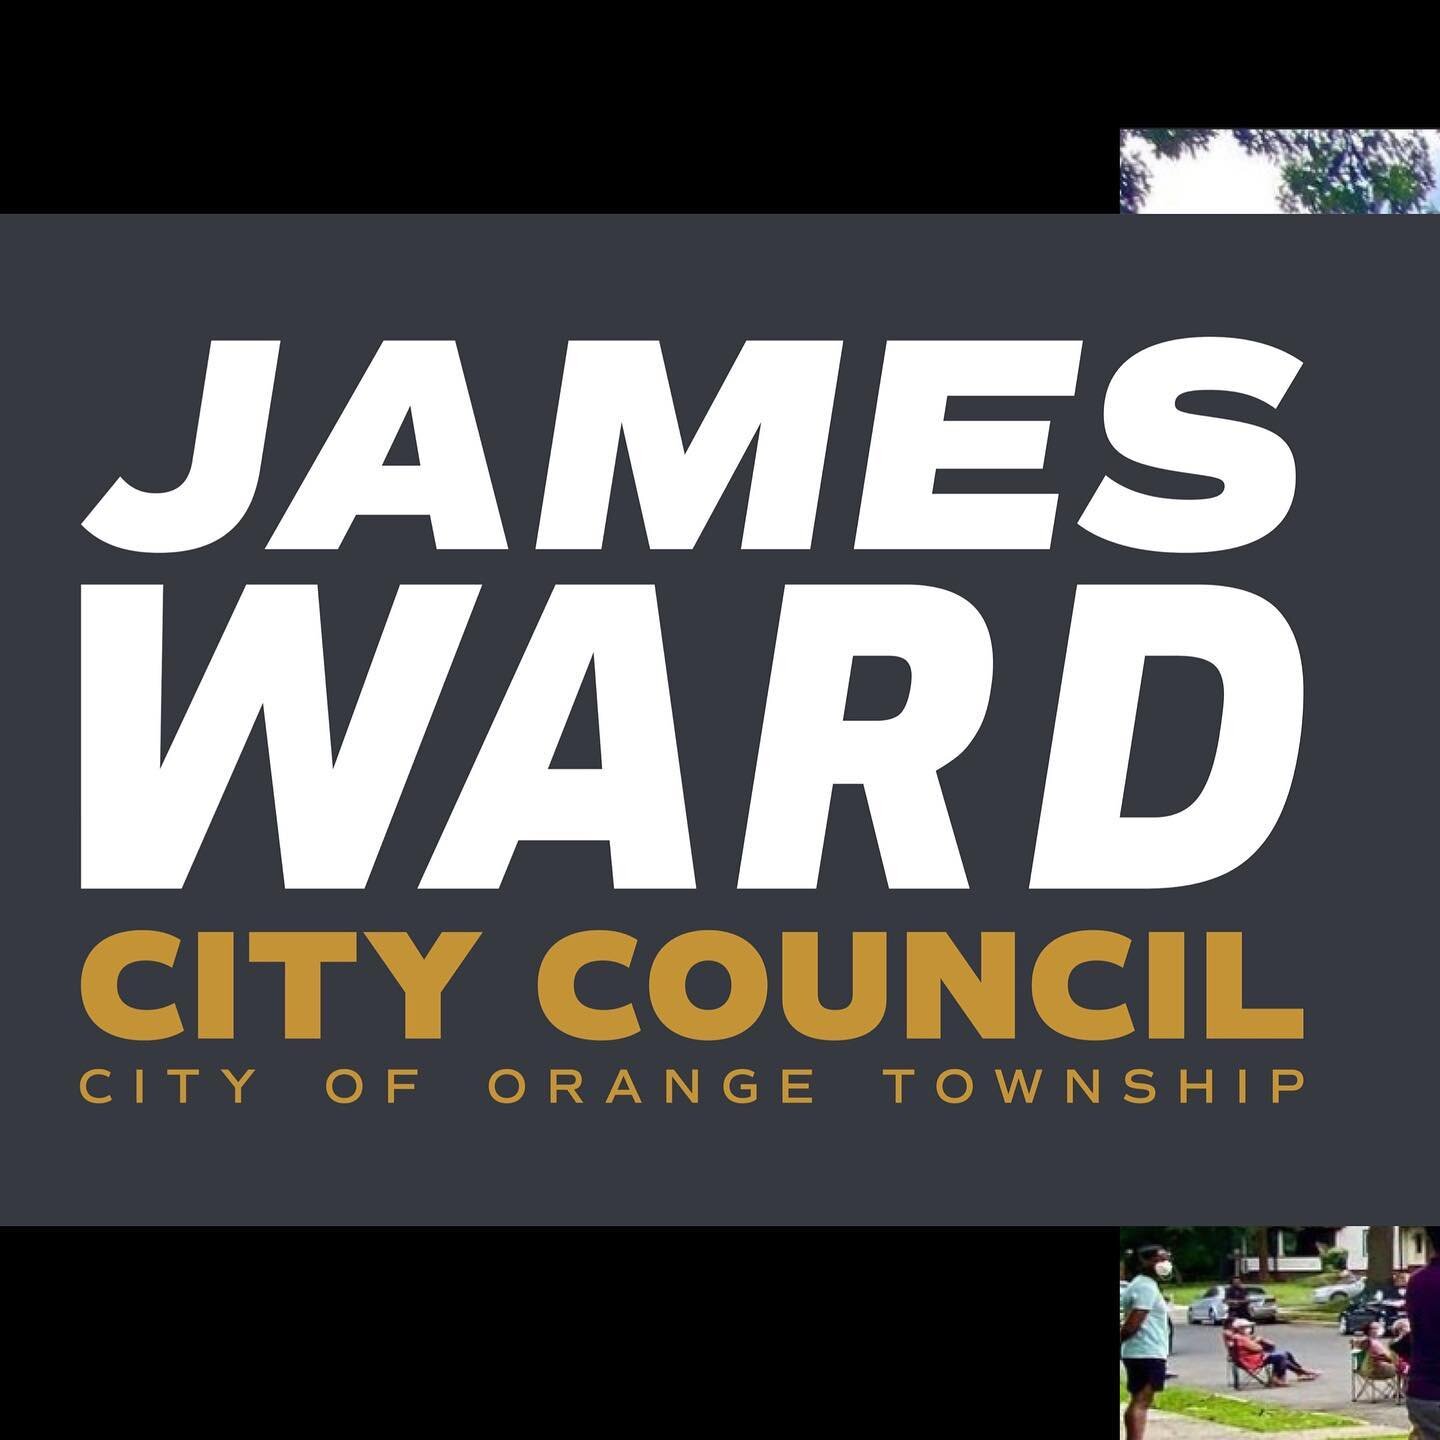 Today I am launching my campaign to be the South Ward City Council Representative. 

I appreciate all of the support many of you have had for me in our small group discussions. Making it more clear the reasons why we need change in City Hall. 

Hope 